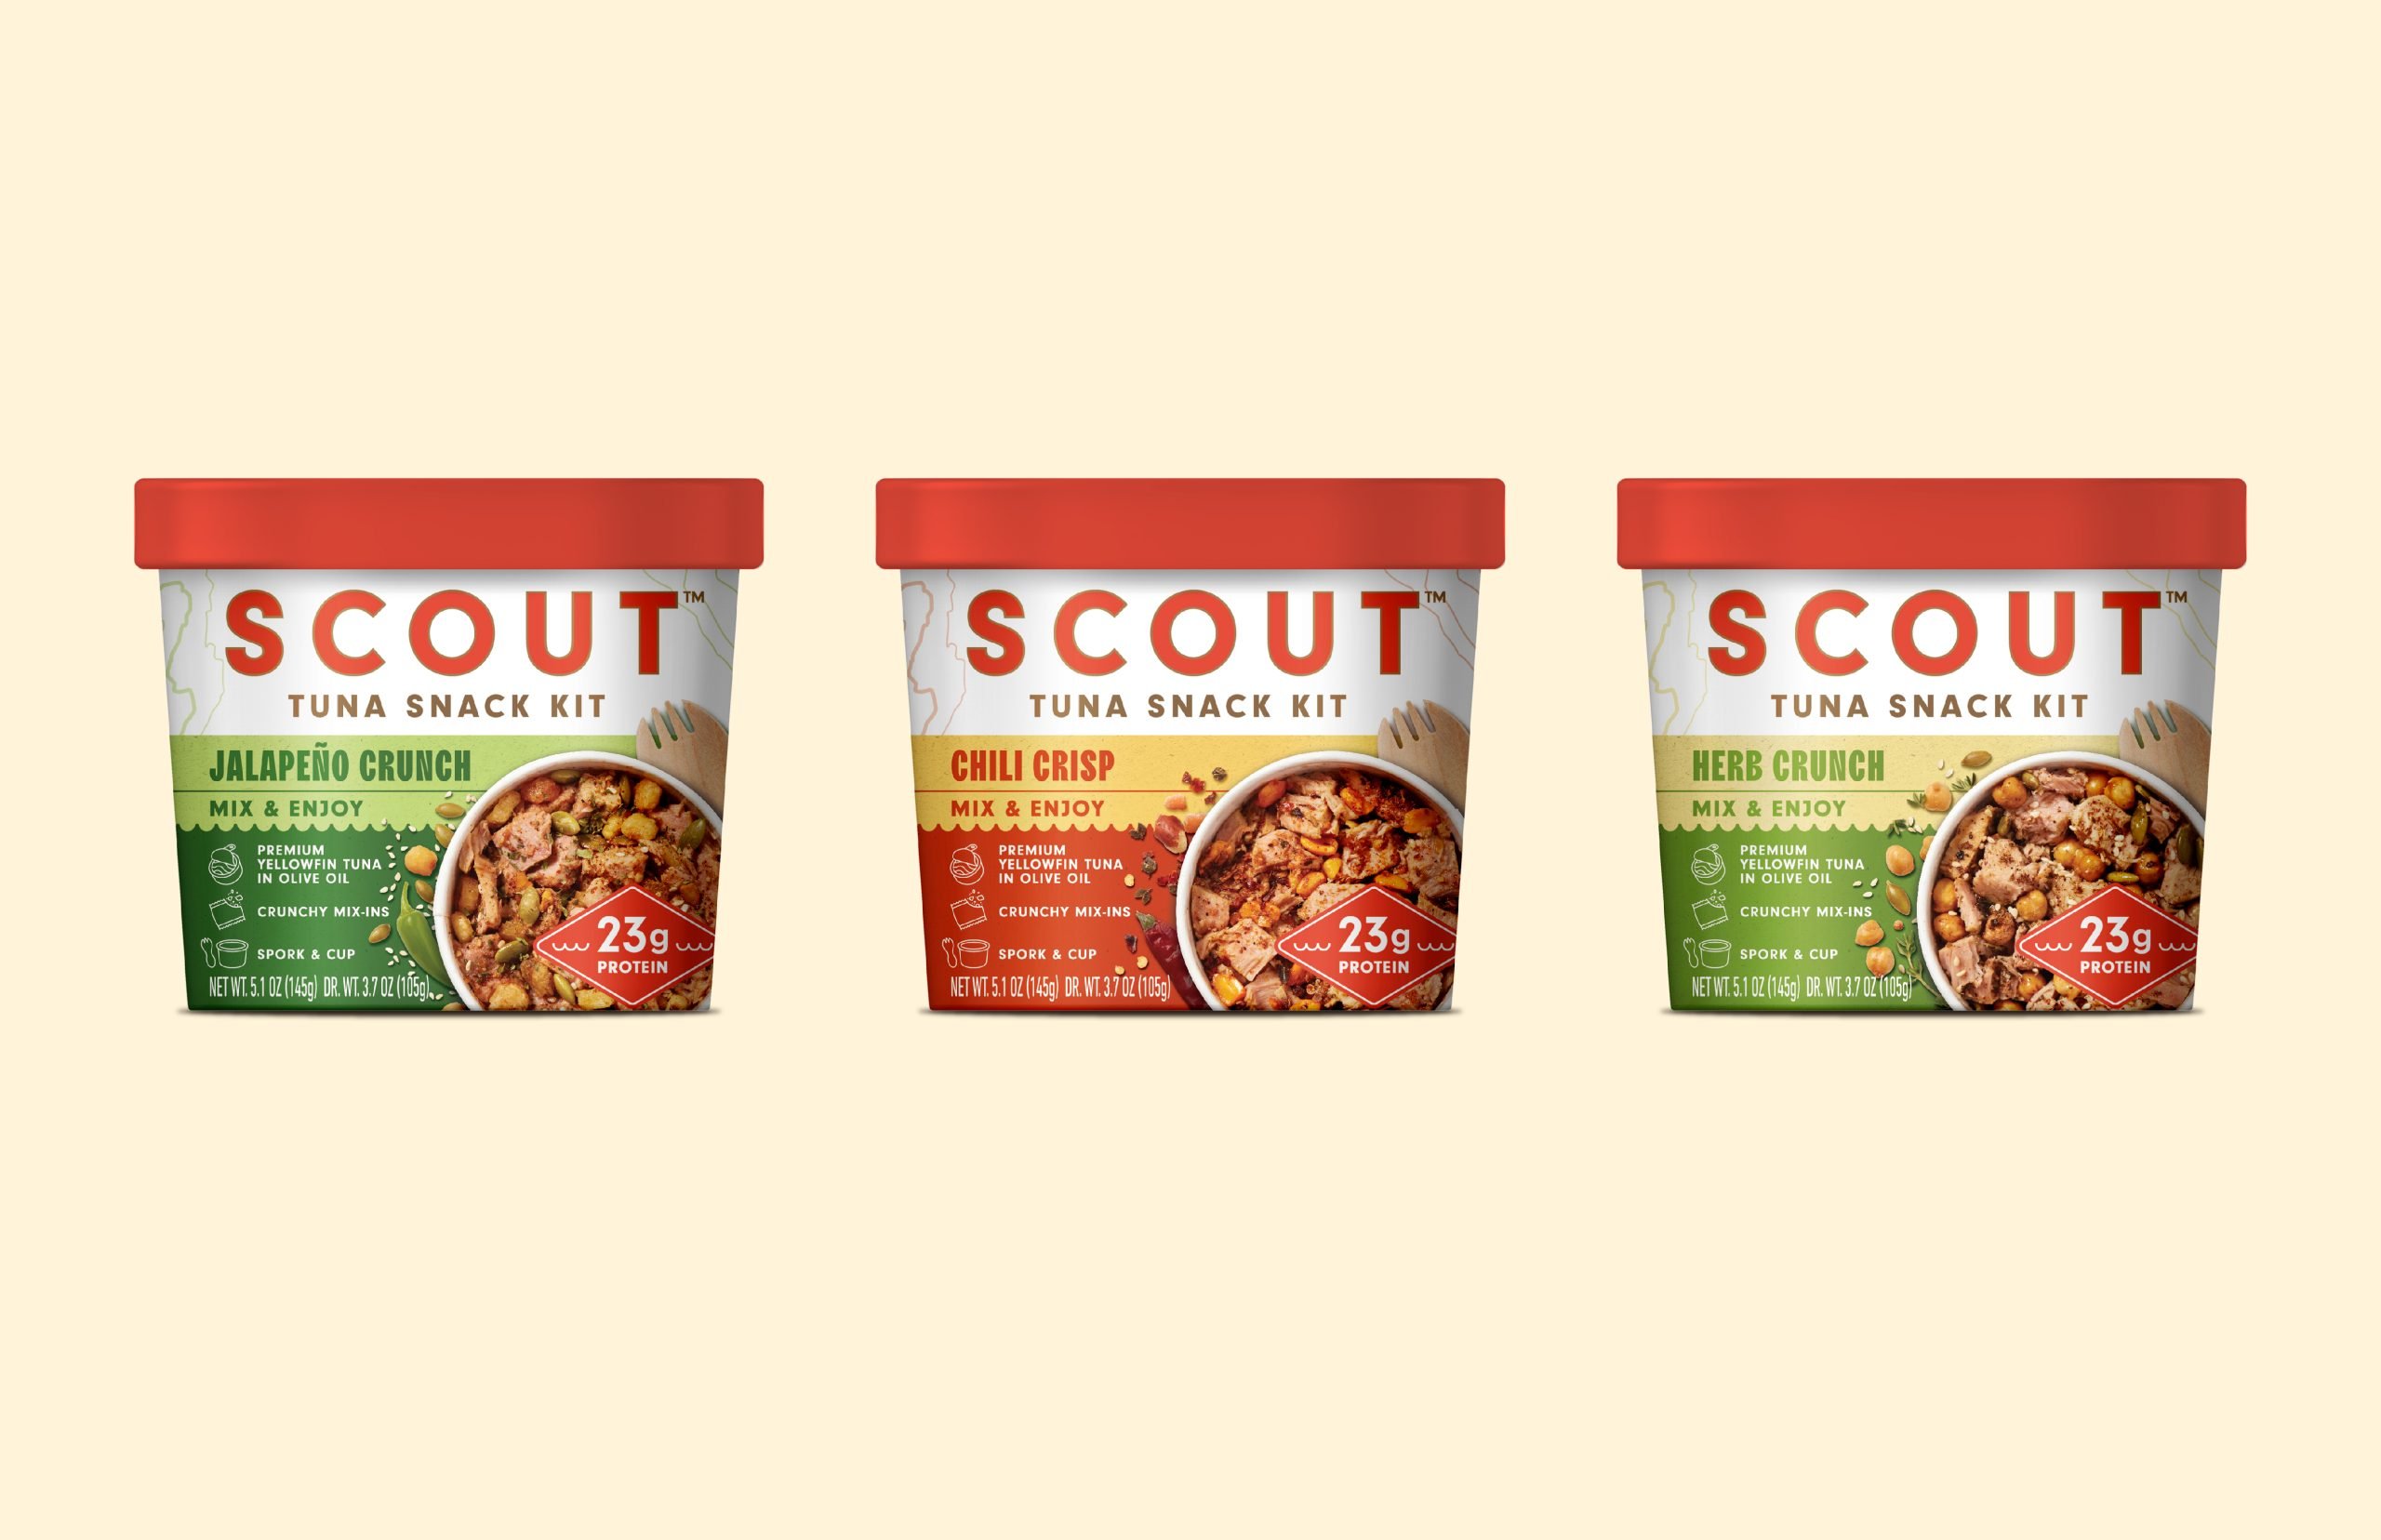 Beardwood&Co. Refreshes Scout’s Snack Kits and Adds More Appeal To Tuna-In-A-Tub Offering